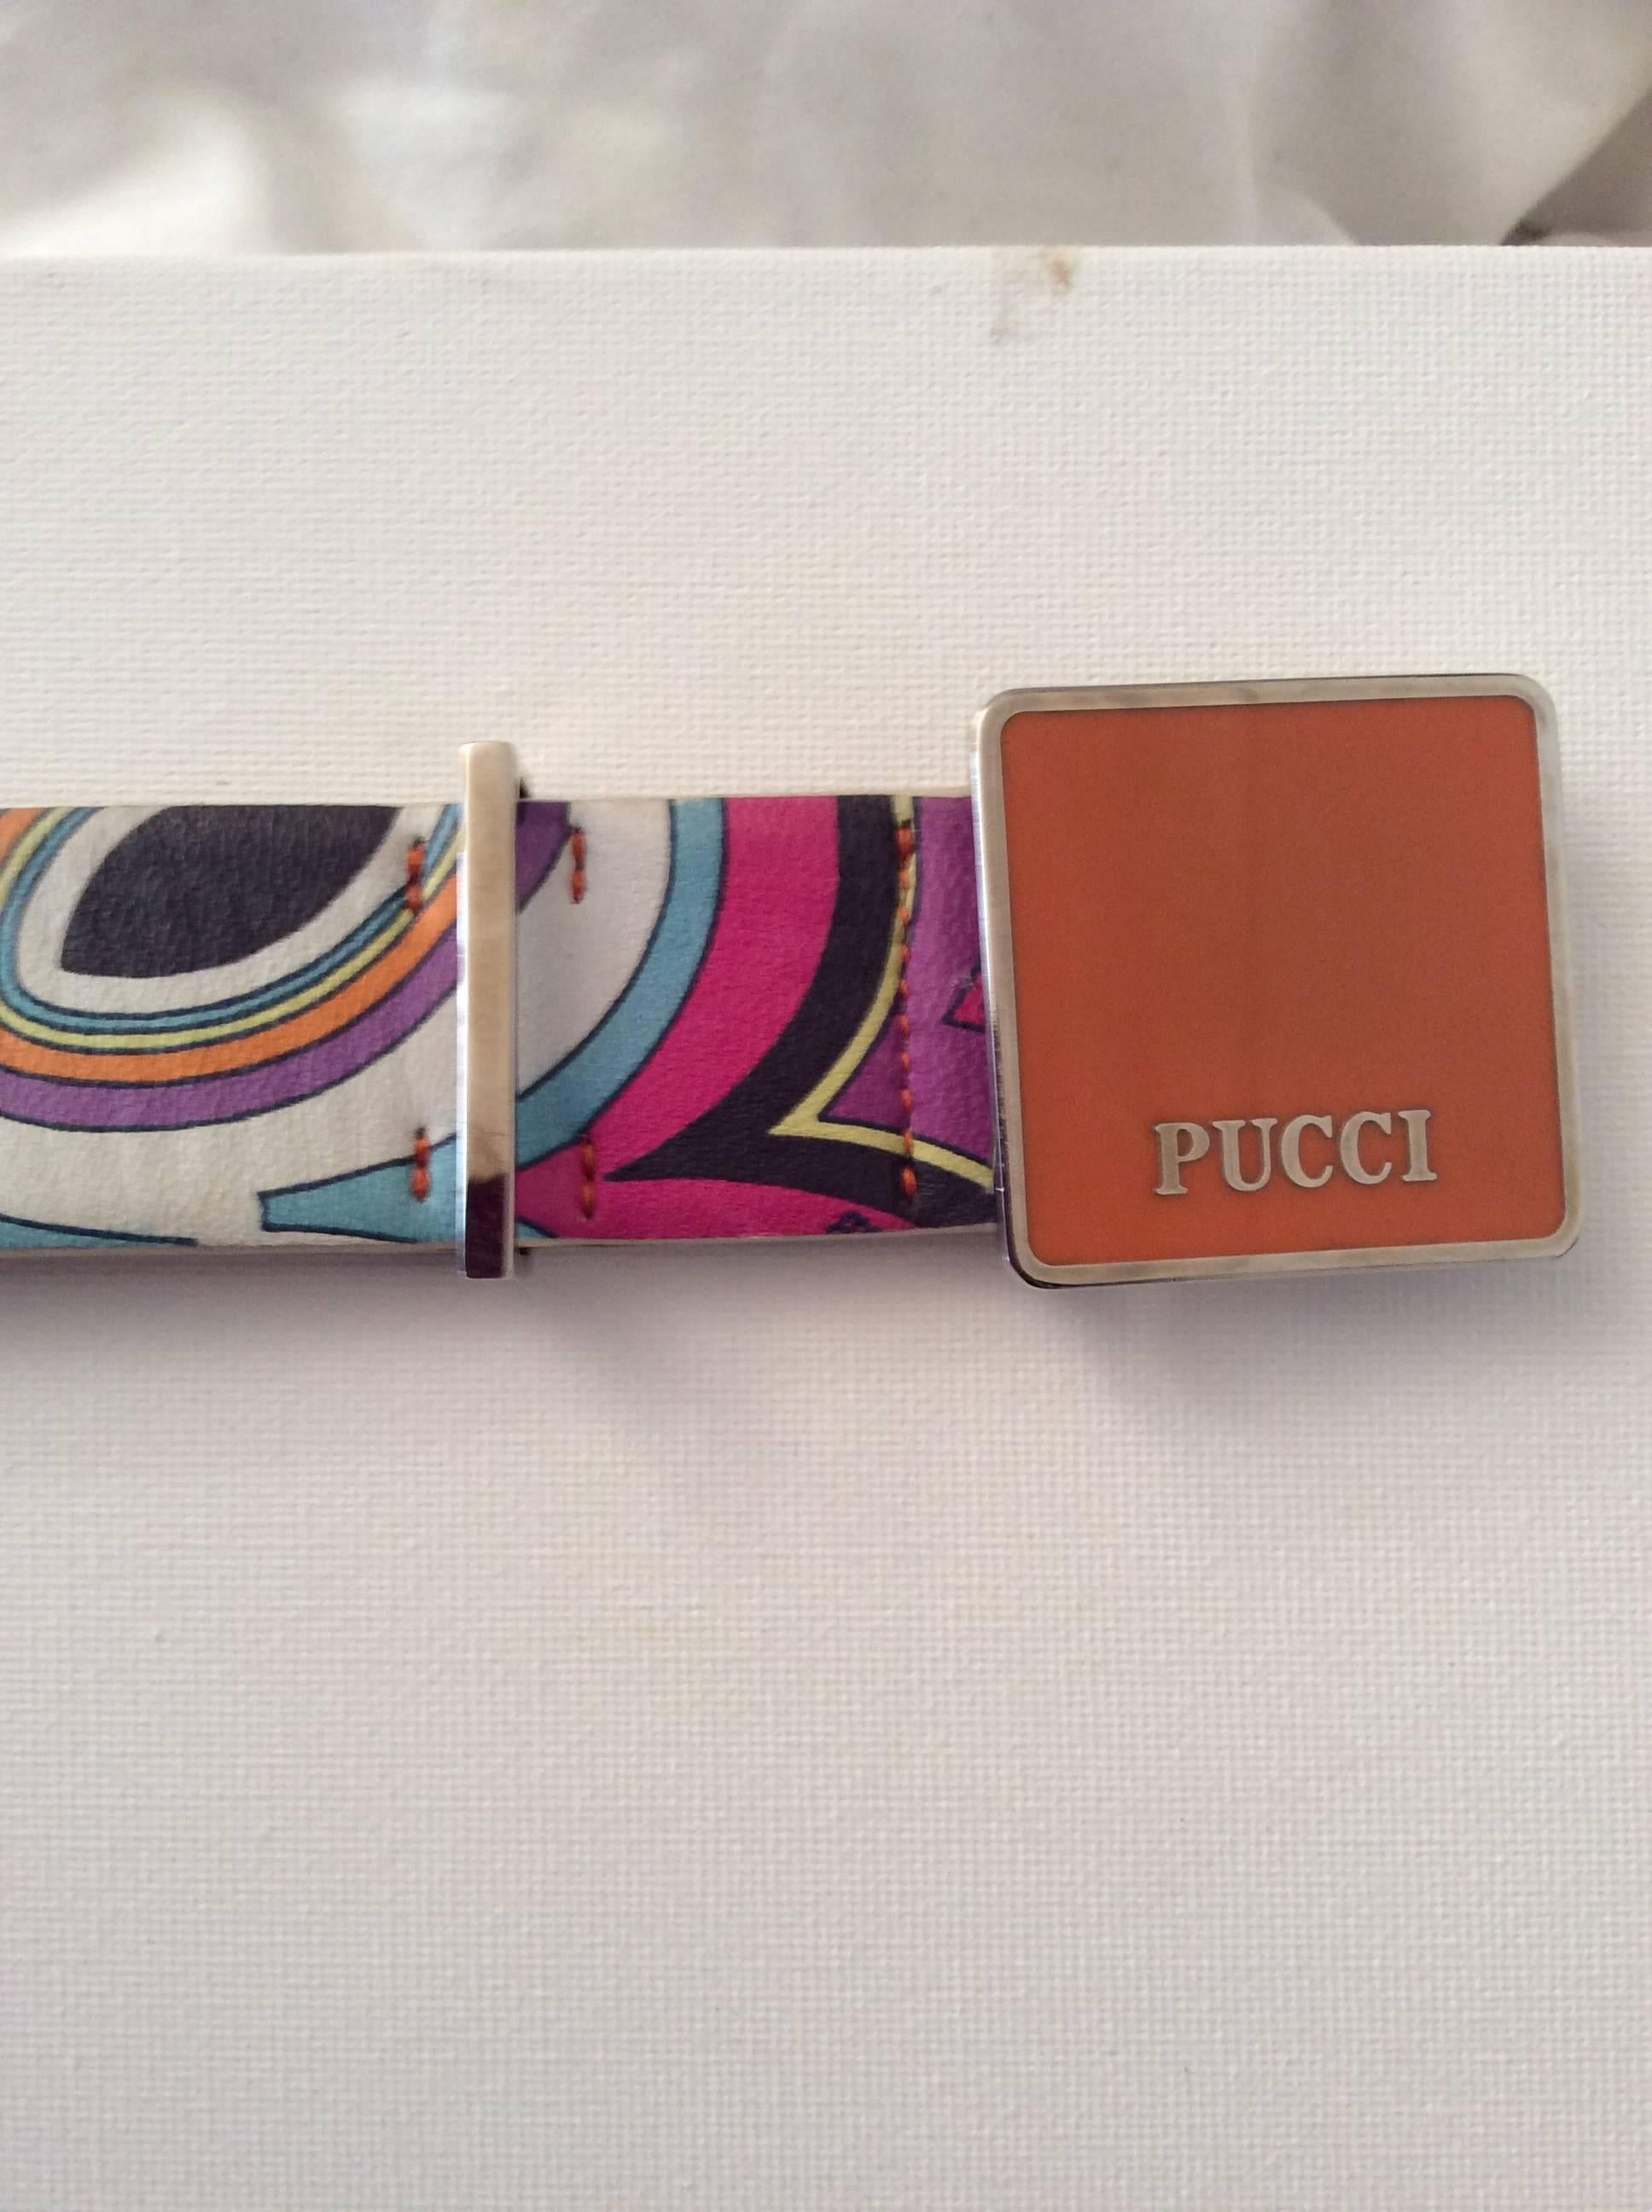 Emilio Pucci Leather Enamel Belt - Size 75  In Good Condition For Sale In Boca Raton, FL